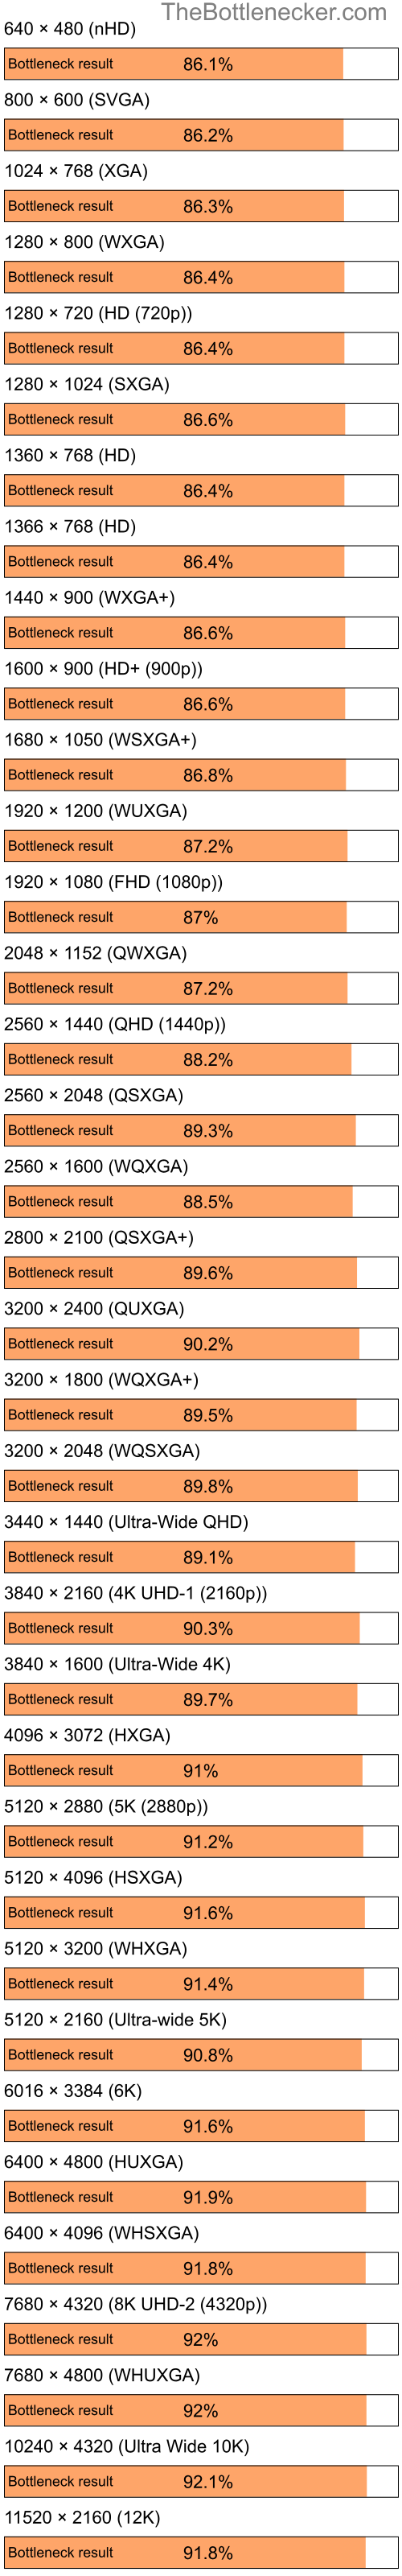 Bottleneck results by resolution for Intel Pentium 4 and AMD Mobility Radeon 9000 IGP in General Tasks